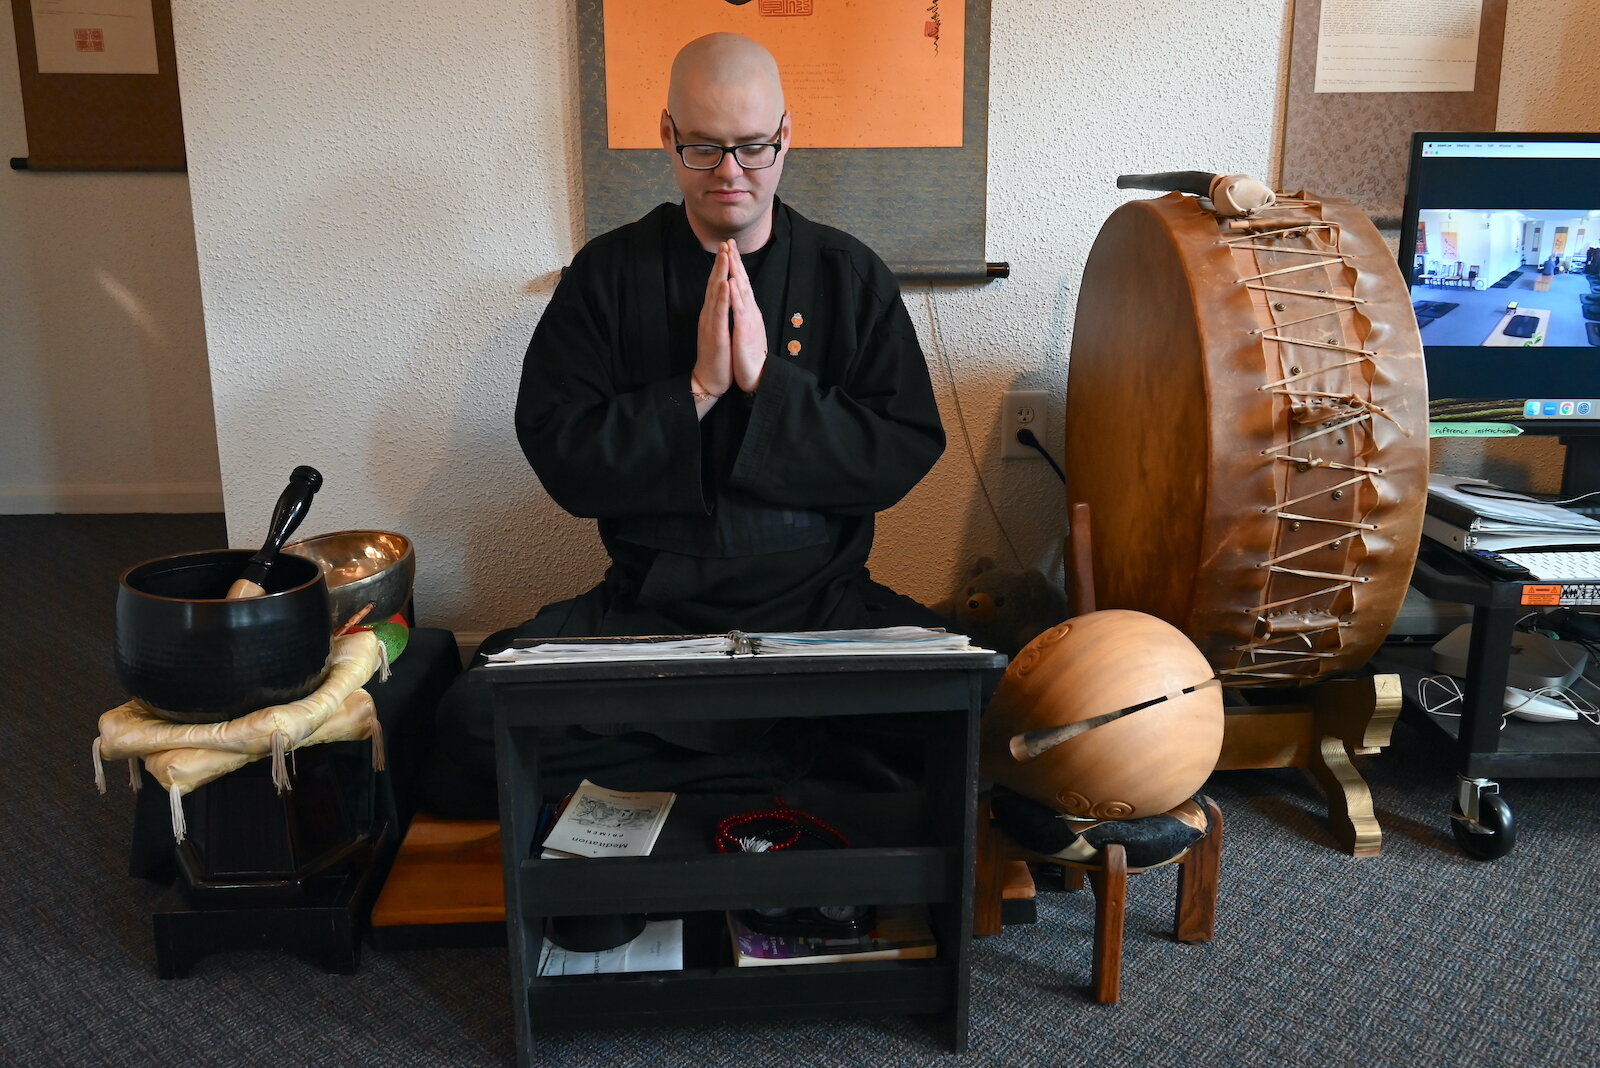 Shodo sits while offering prayers for the sick and suffering at the Buddhist Temple Monastery in Battle Creek.